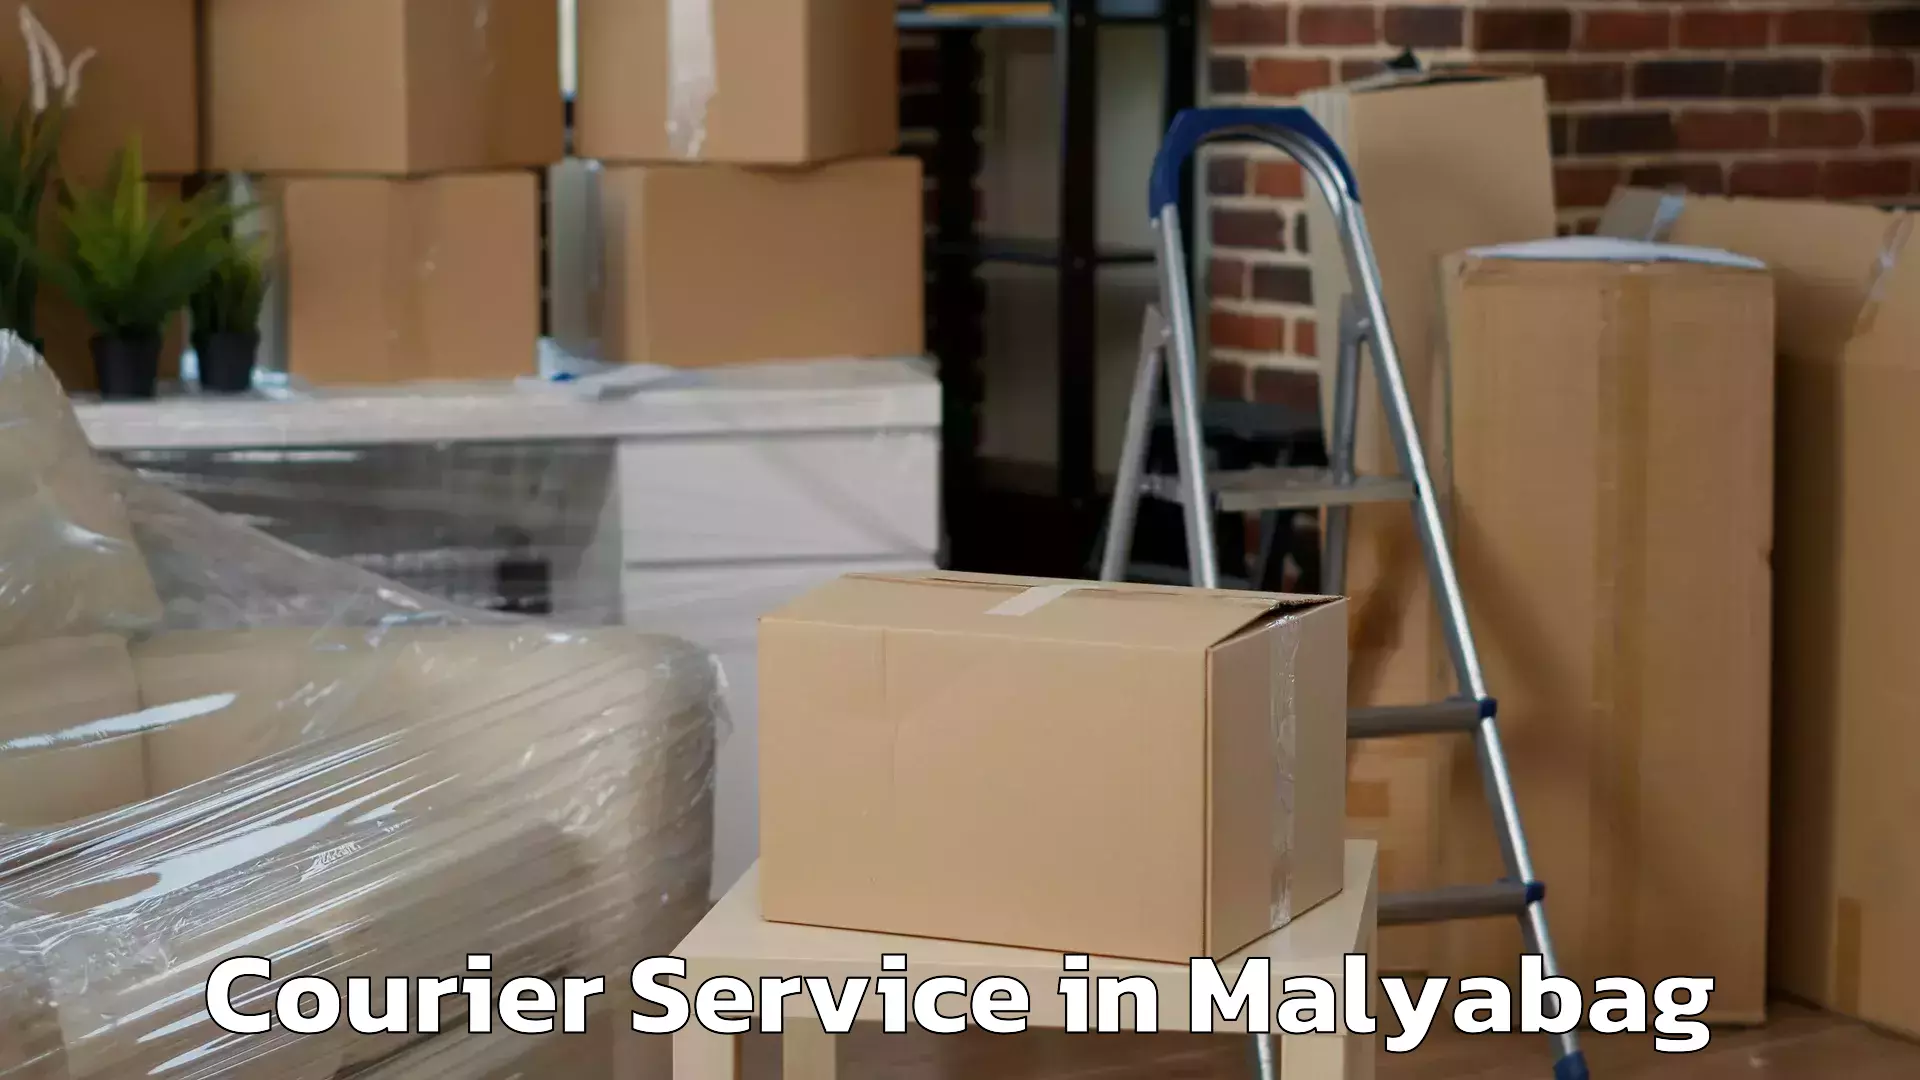 Express logistics providers in Malyabag